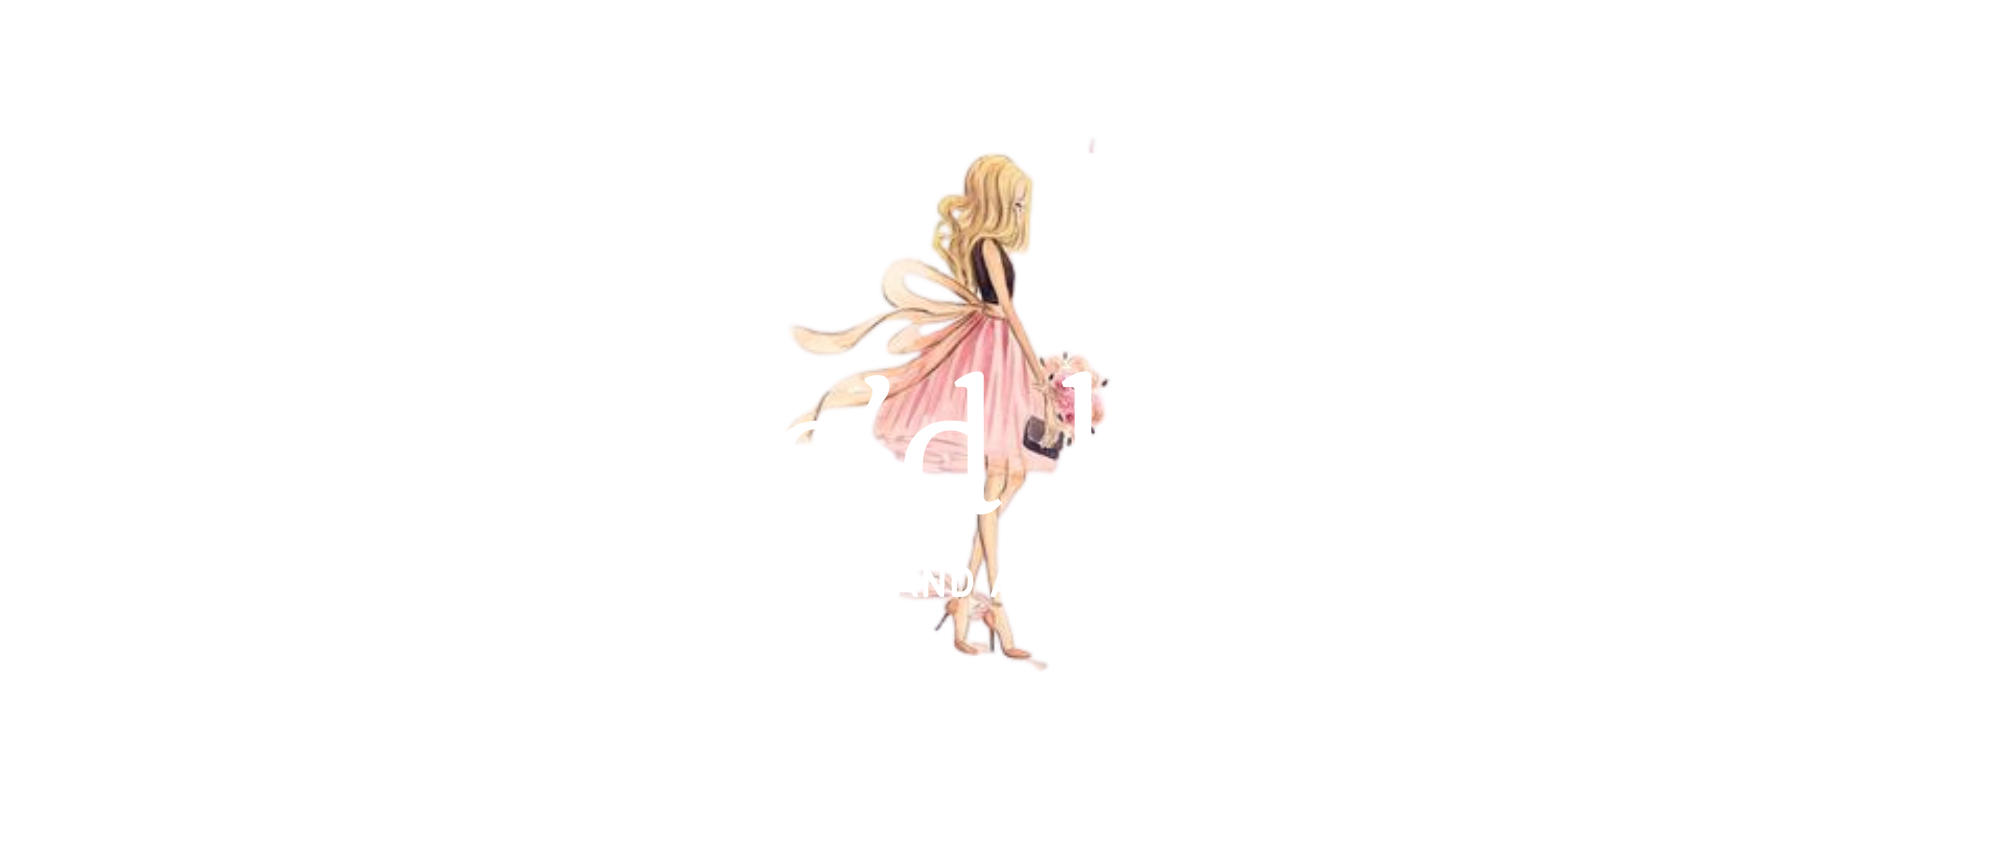 Boutique'd by LeeLee